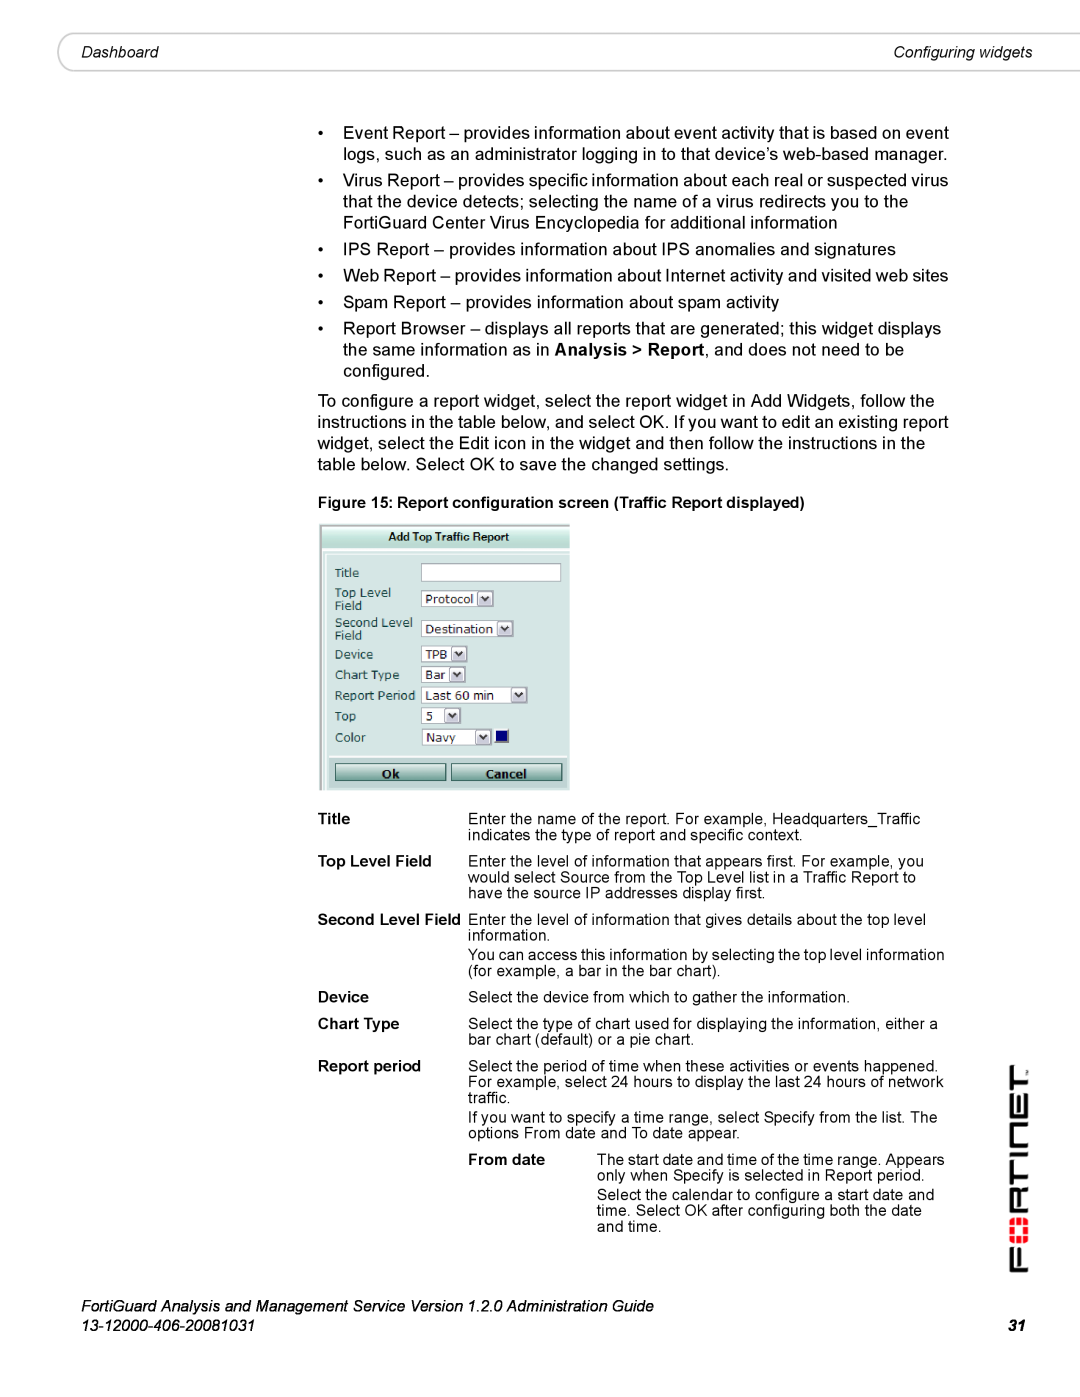 Fortinet 1.2.0 manual IPS Report - provides information about IPS anomalies and signatures 